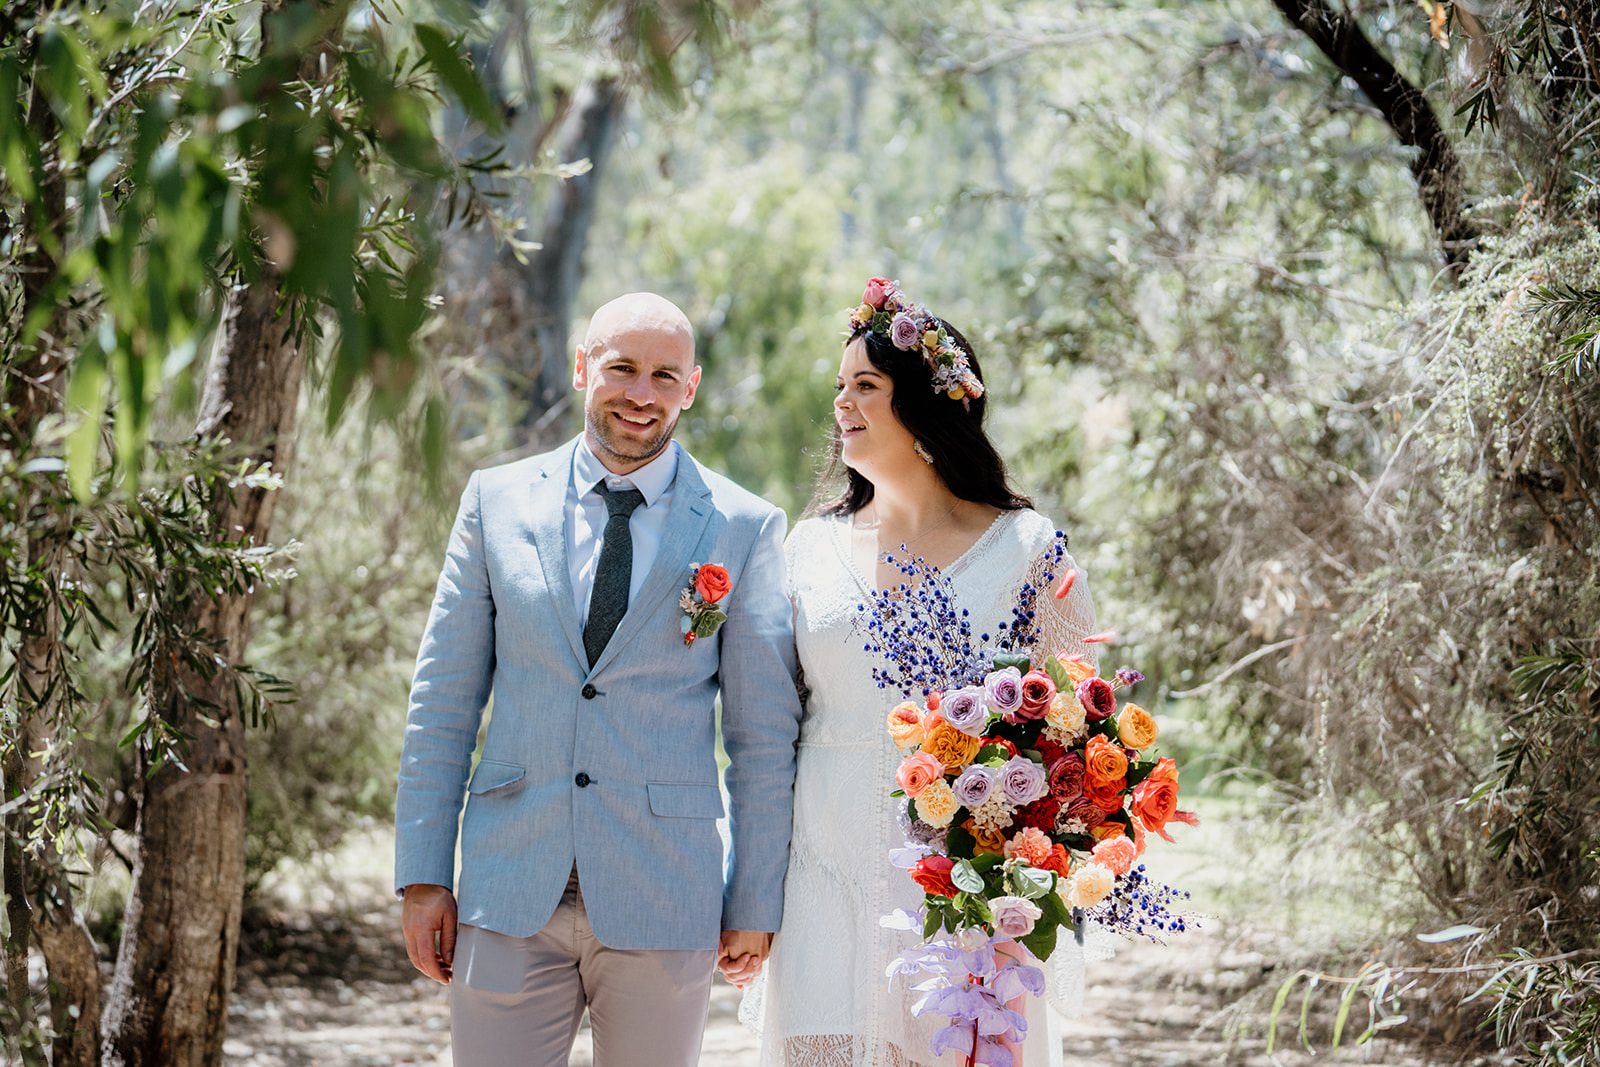 Wedding in Wonga Wetlands, Albury. Bride and groom natural photo. Vibrant colour wedding bouquet. Bright colour wedding.